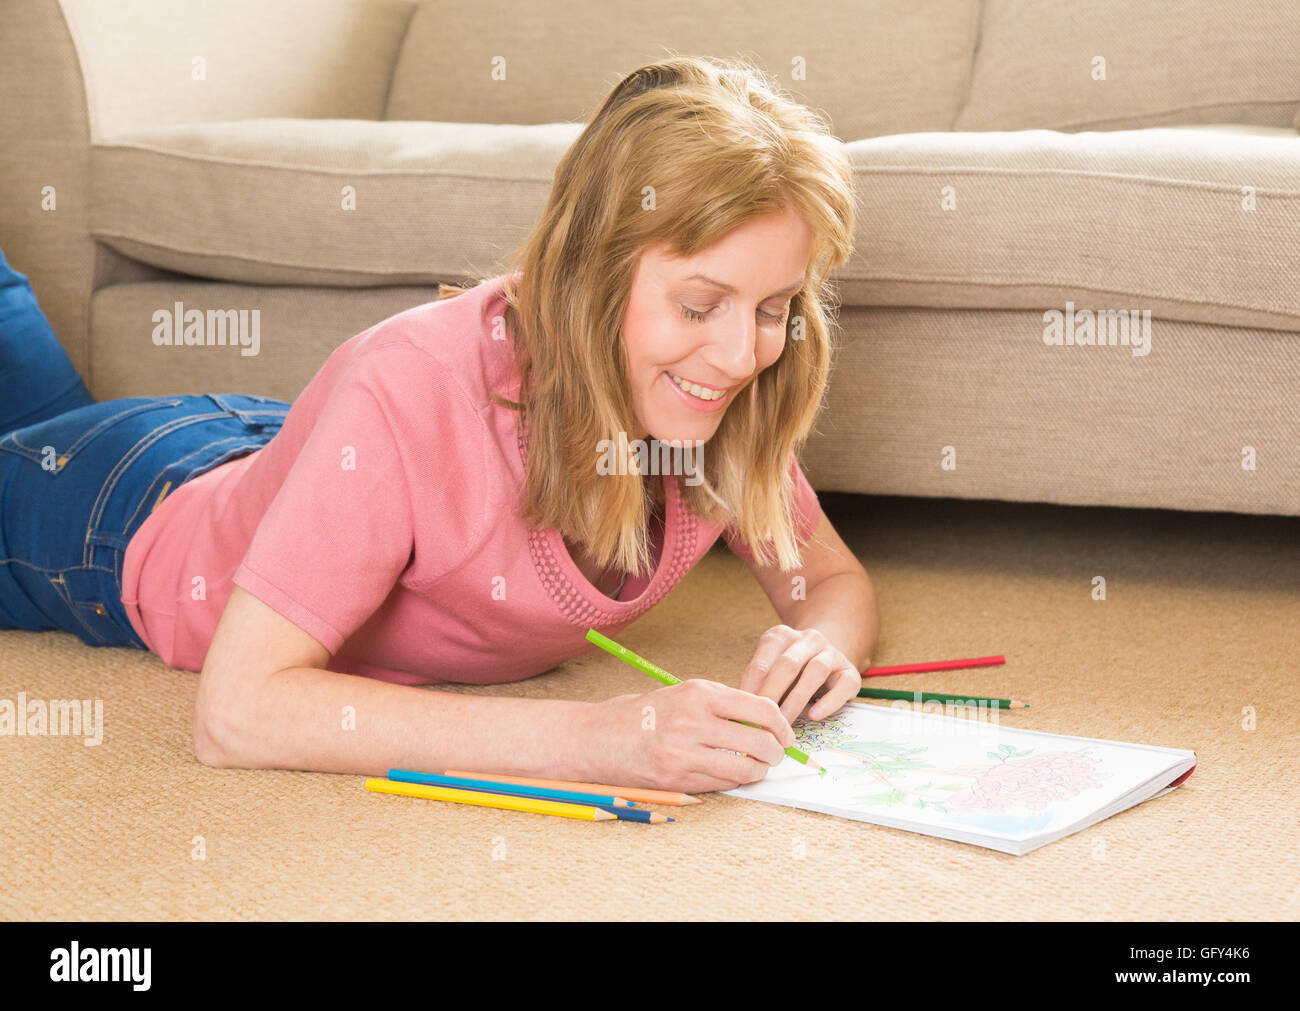 woman colouring in a book Stock Photo